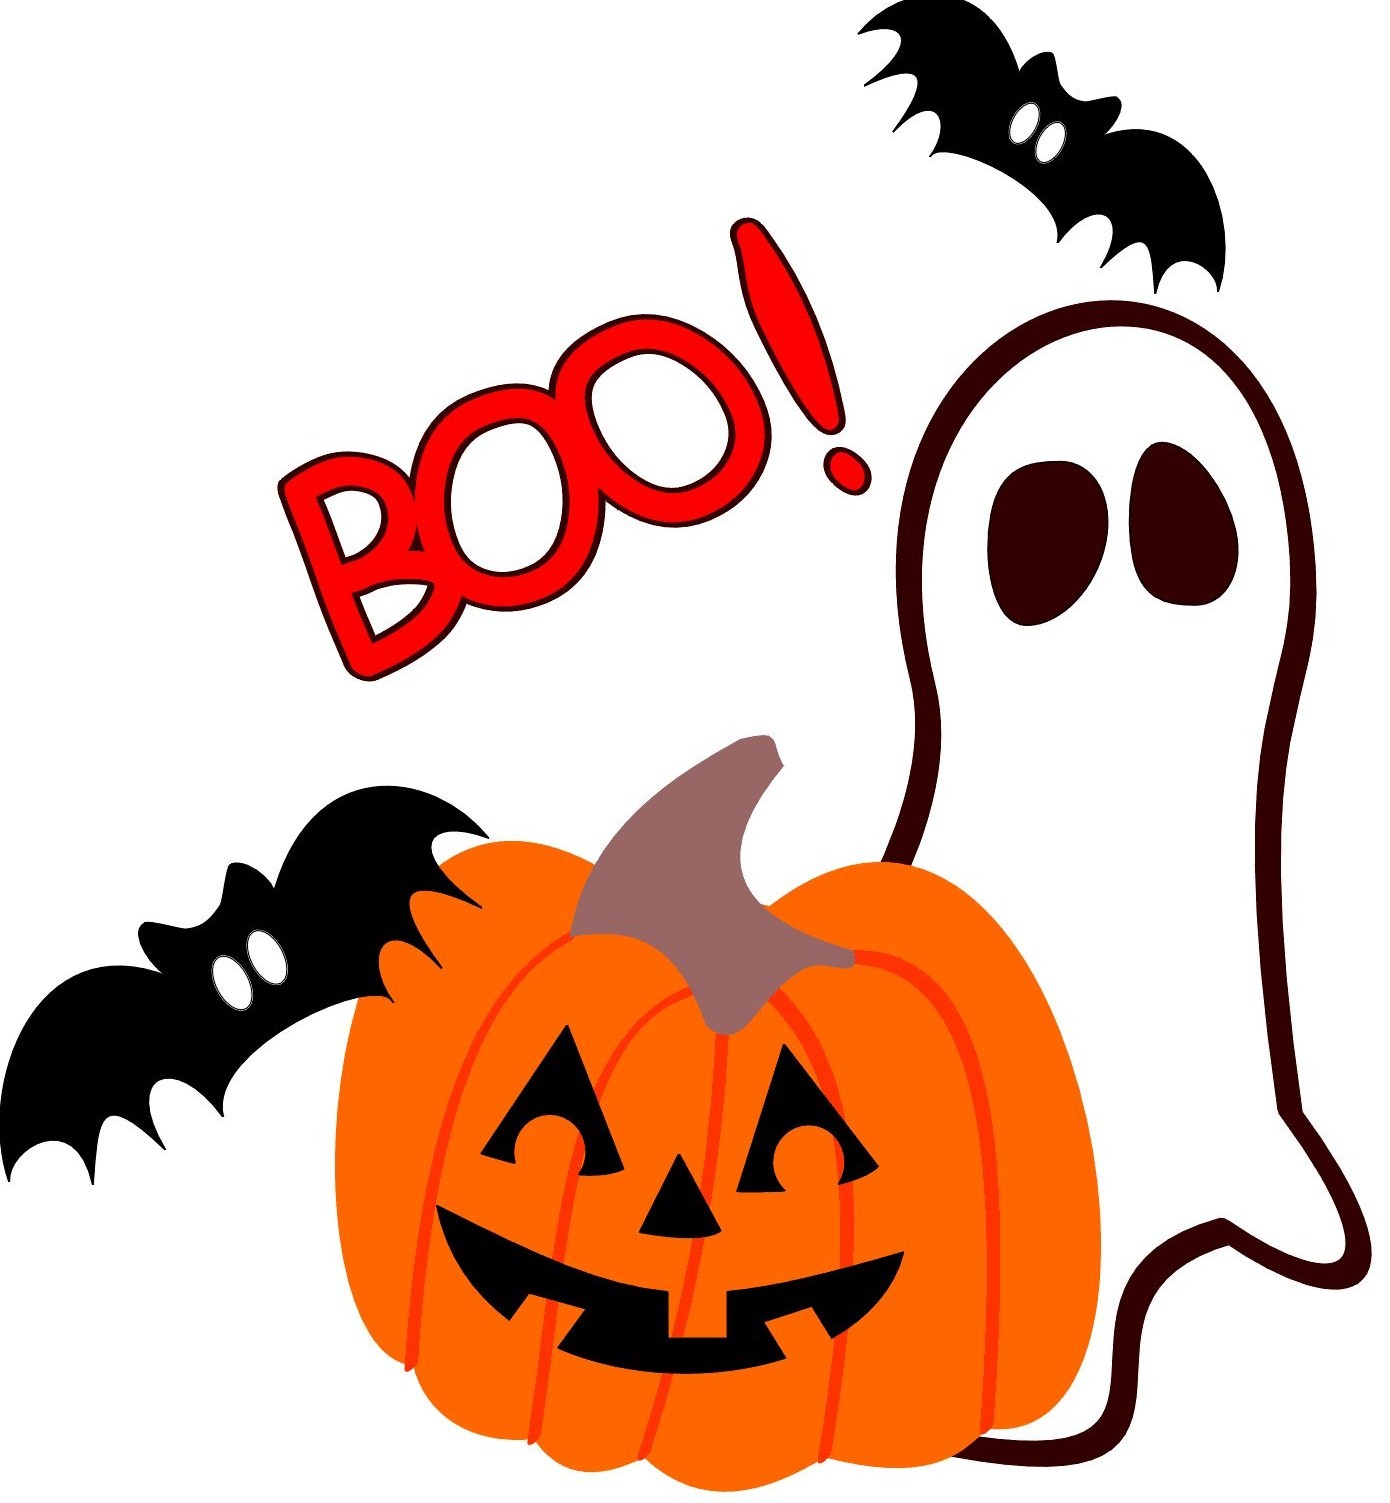 Friendly clipart friendly kid. Shelton library system halloween